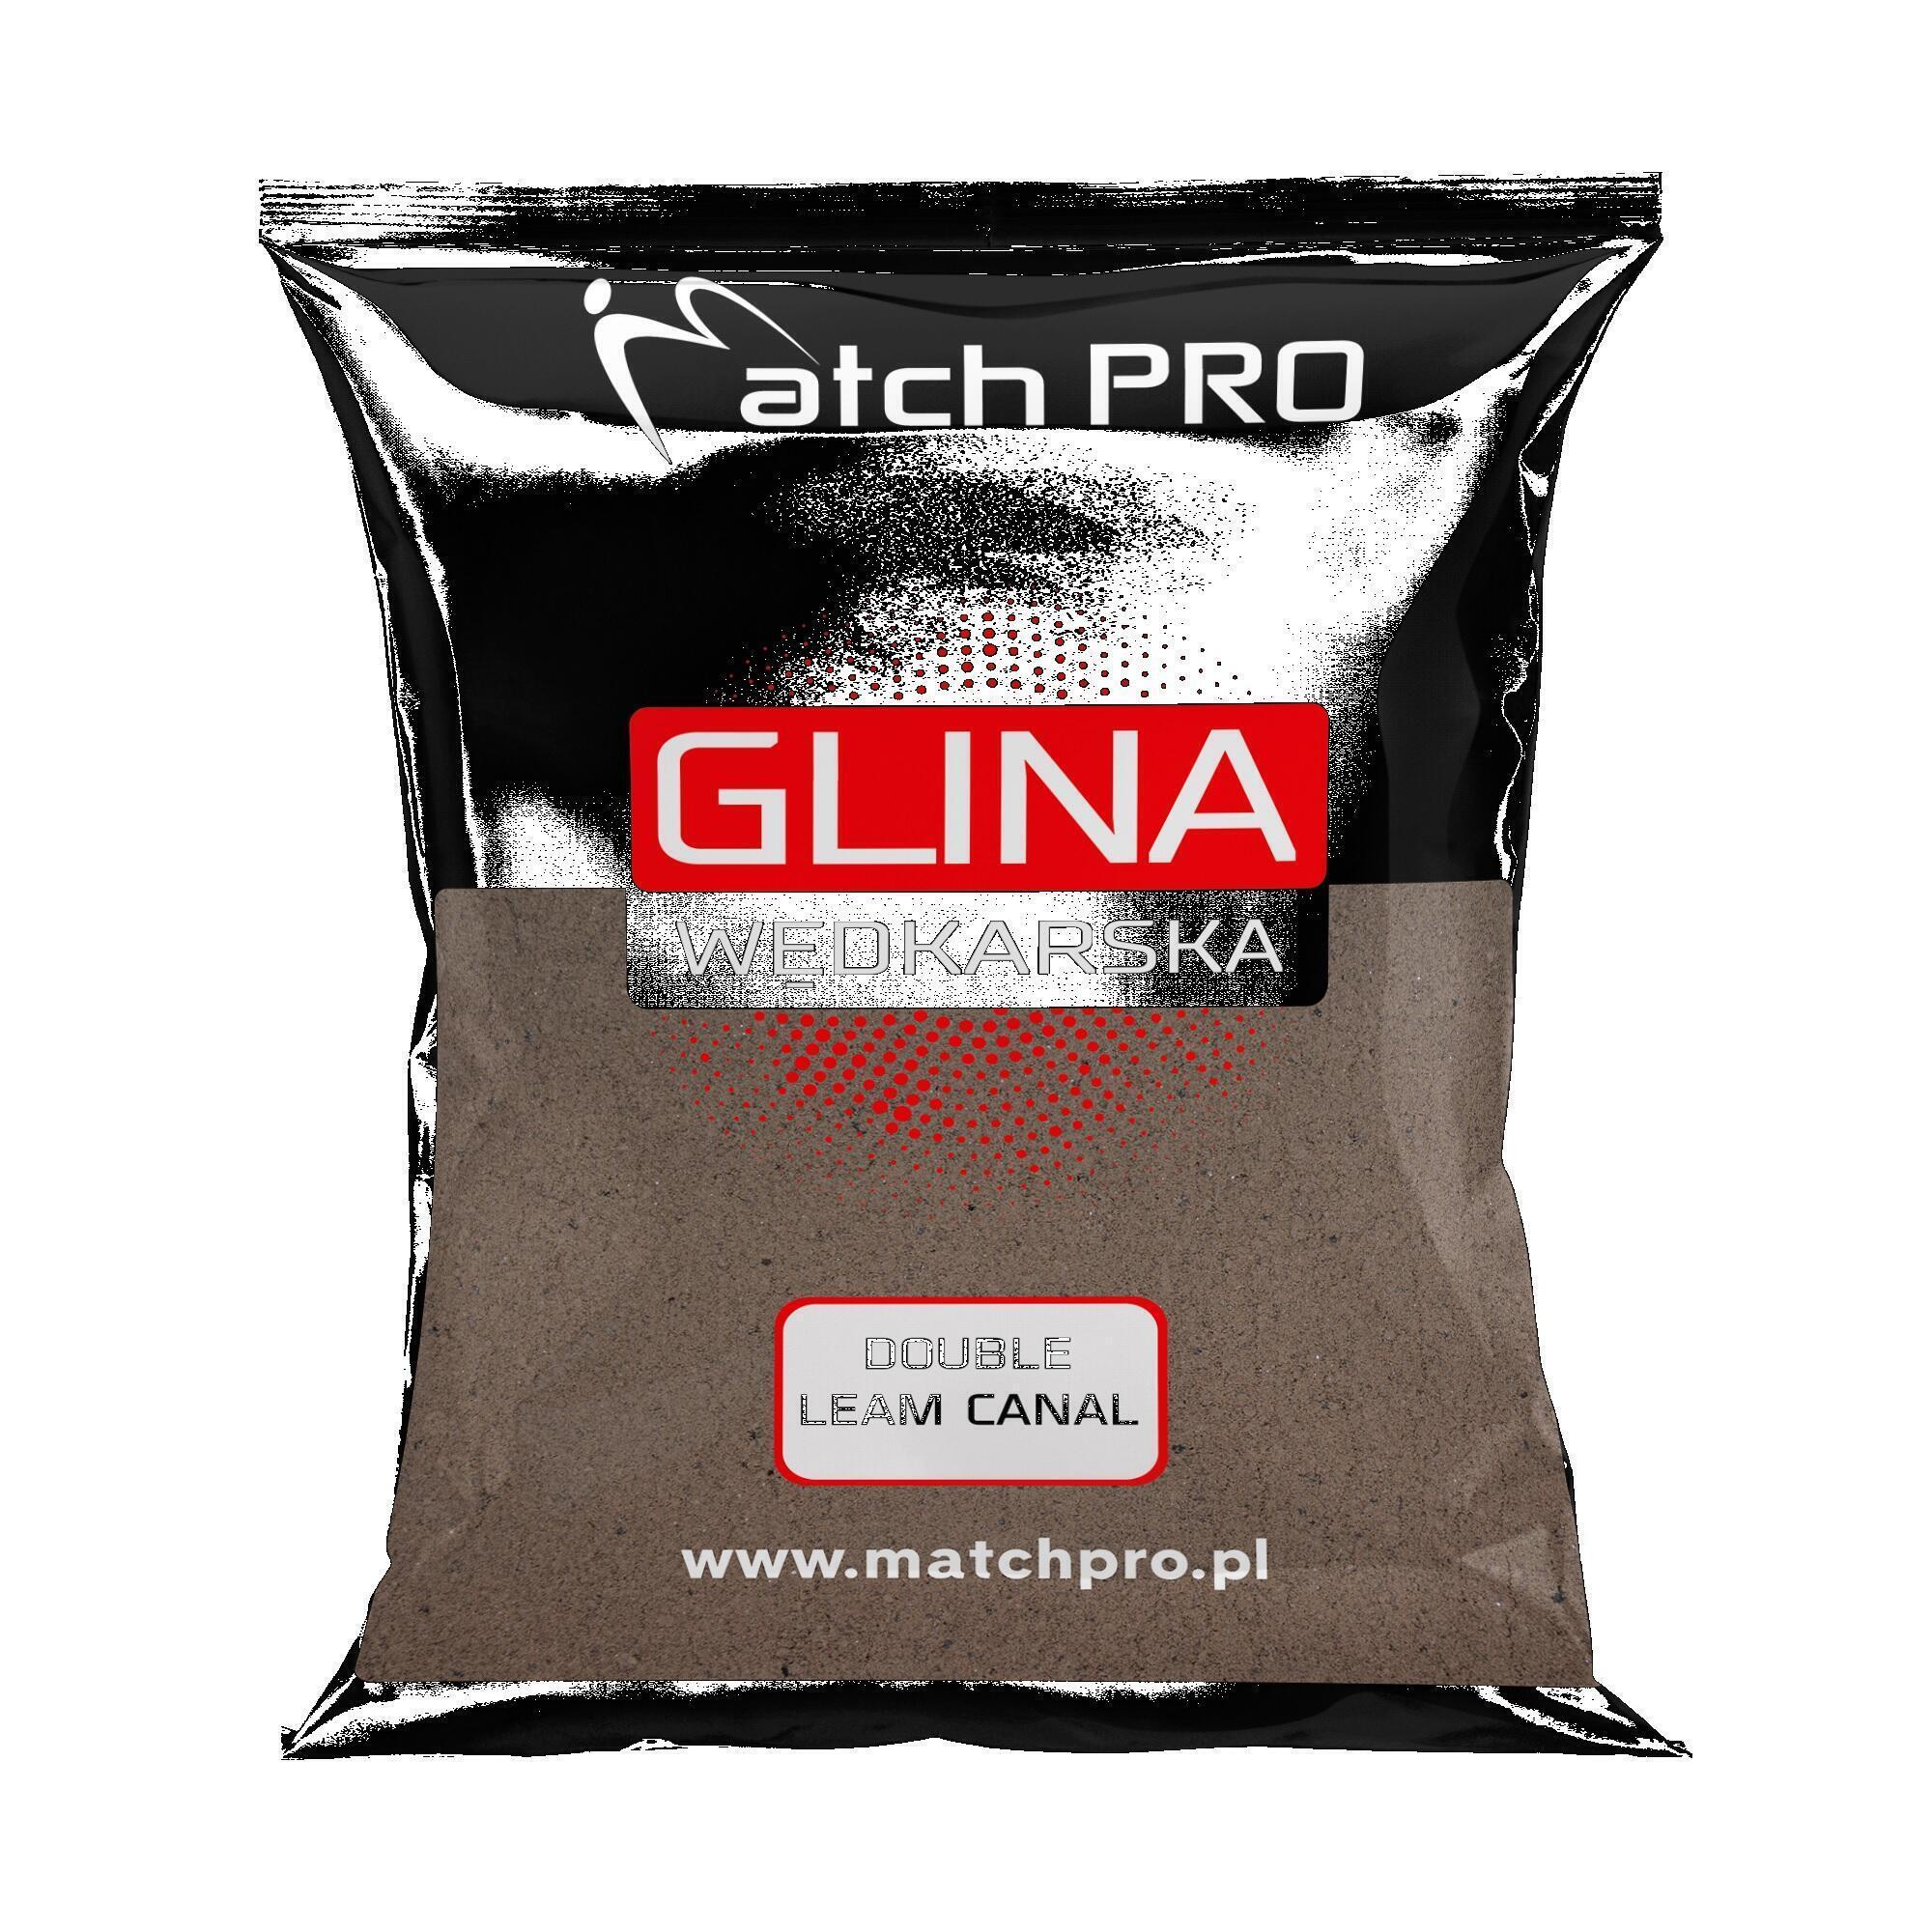 Glina Double Leam Canal 2 KG